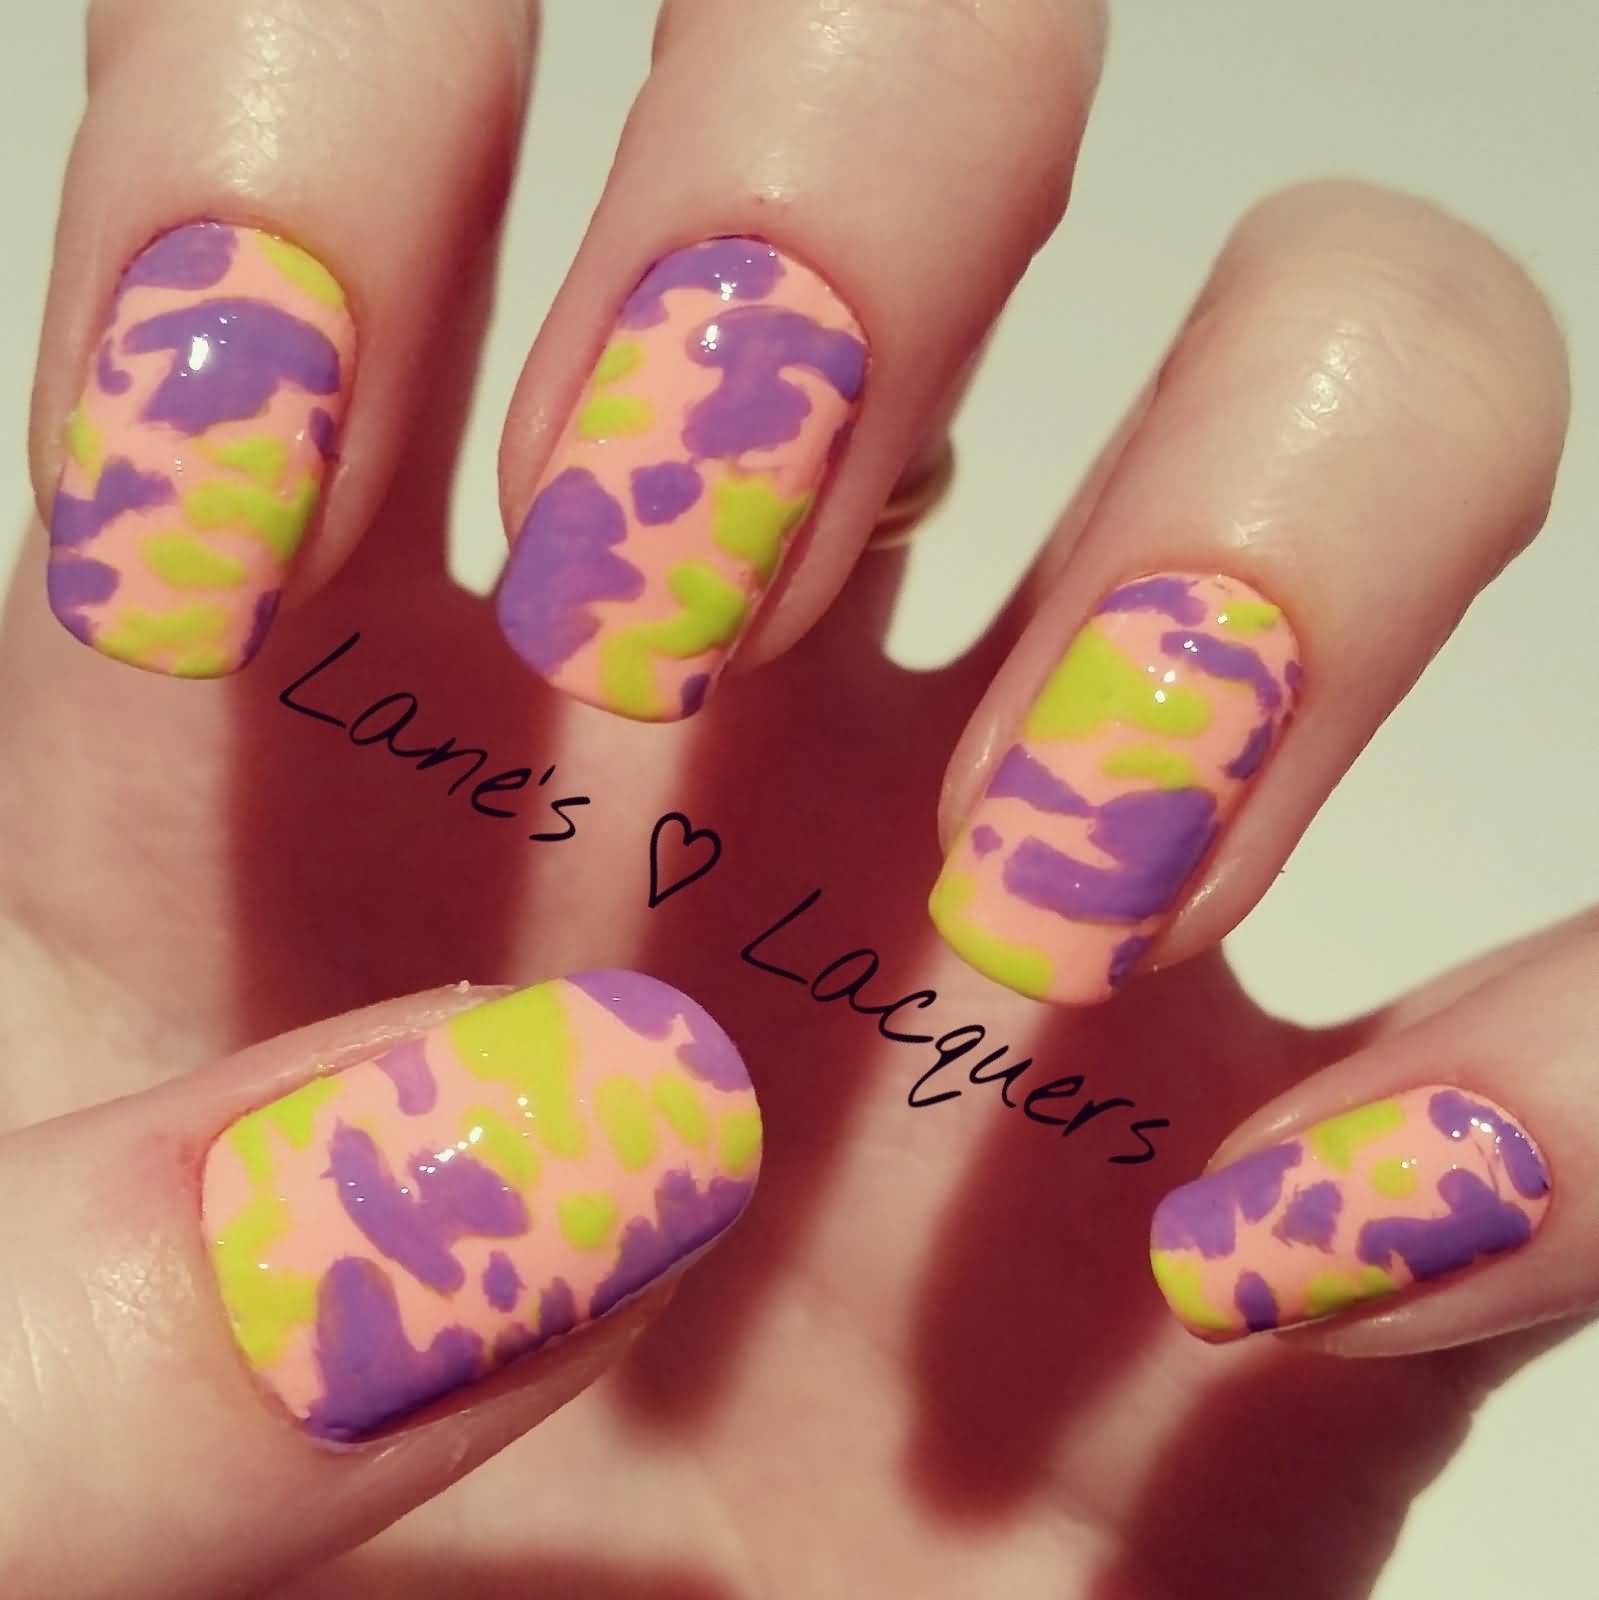 Orange Nails With Purple And Green Spots Design Nail Art